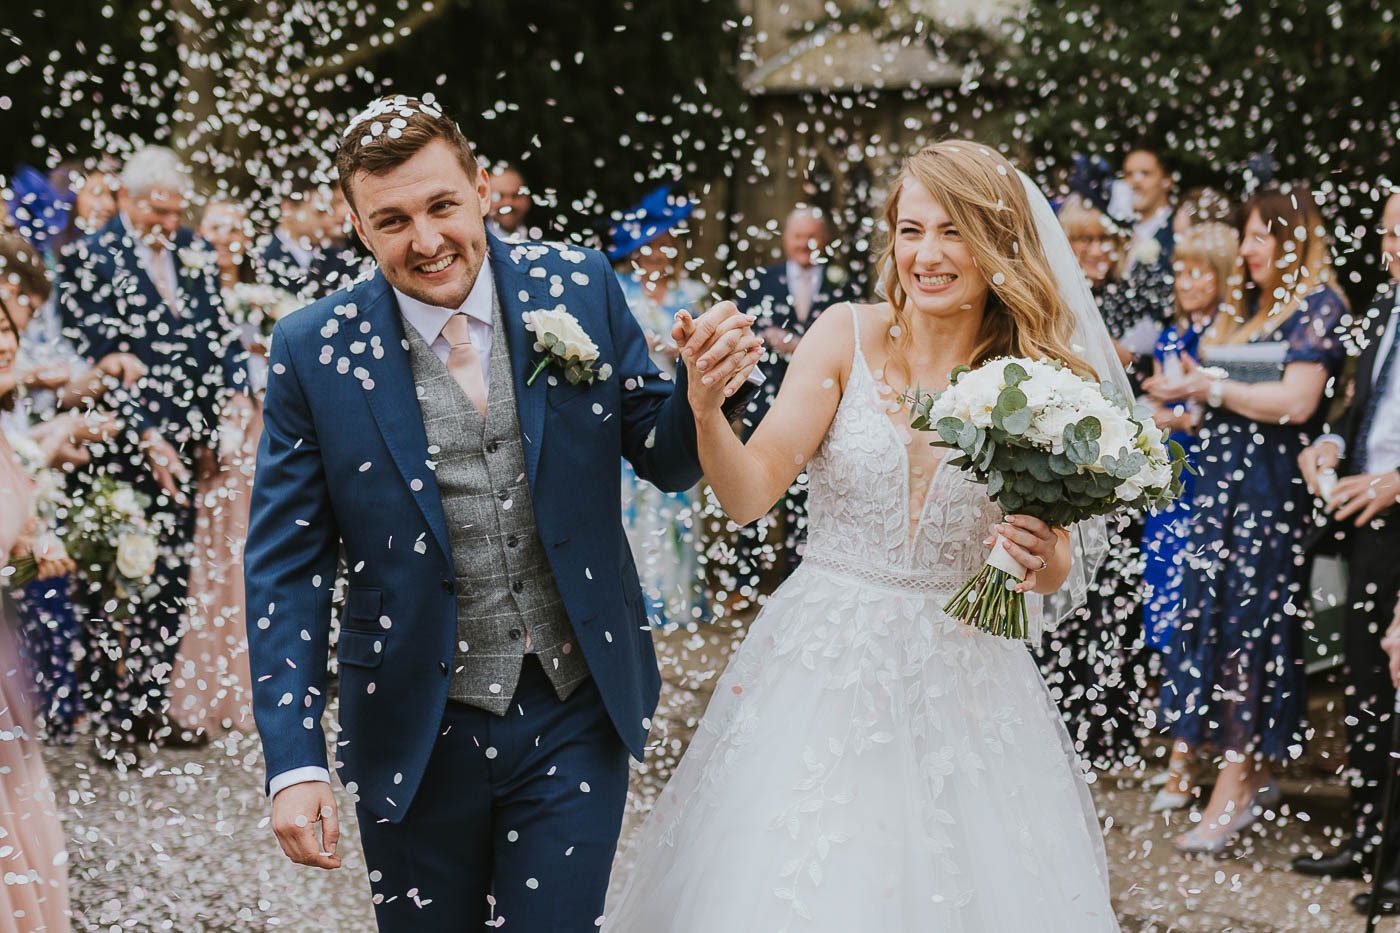 ripley castle wedding photography | photo of happy bride and groom walking through paper confetti after their church wedding ceremony at ripley castle